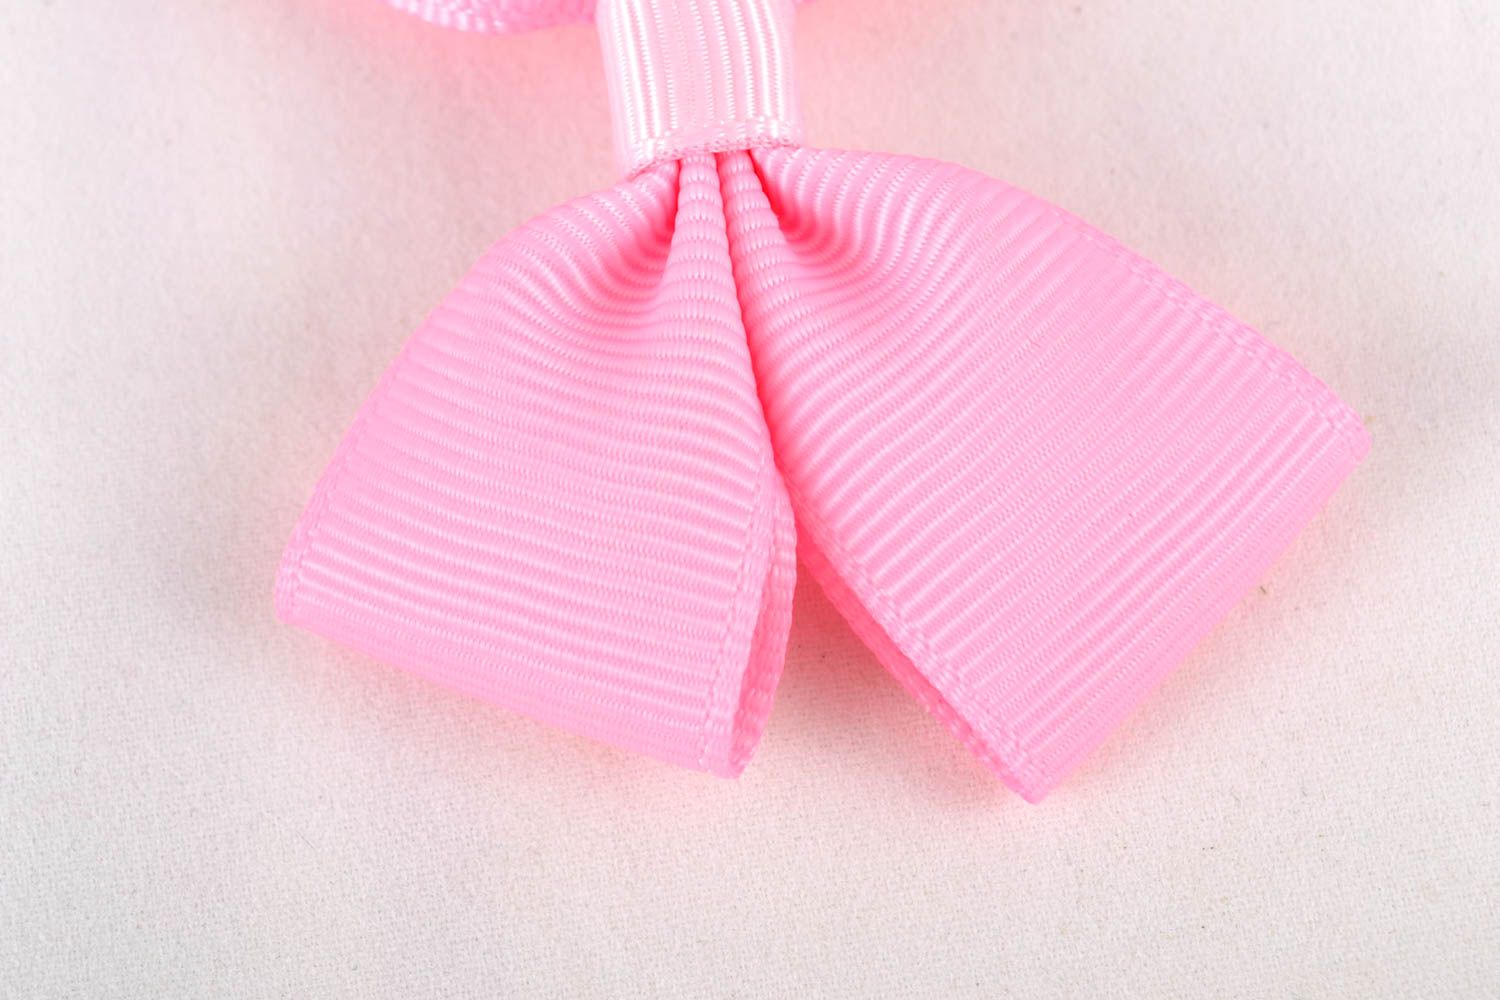 Unusual handmade textile bows hair bow brooch jewelry jewelry making supplies photo 5